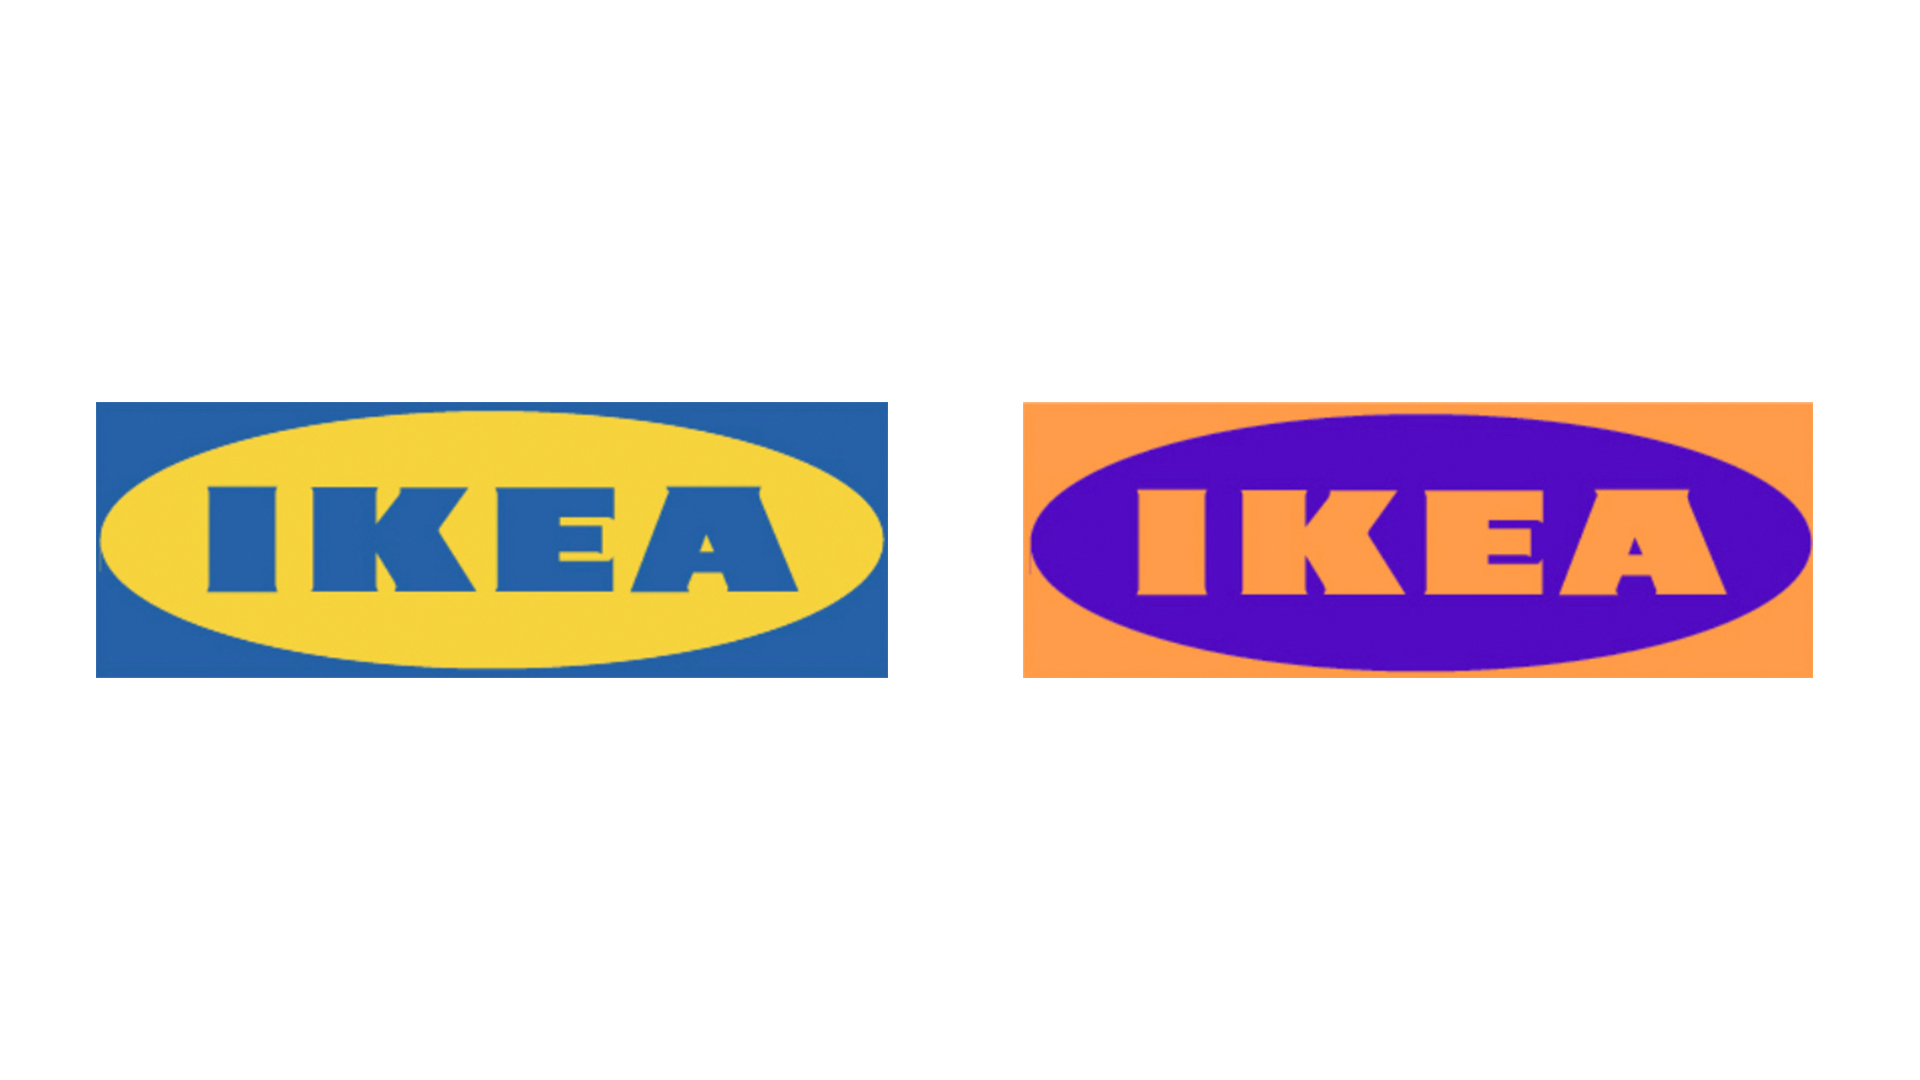 Ikea logo in yellow and blue and orange and purple